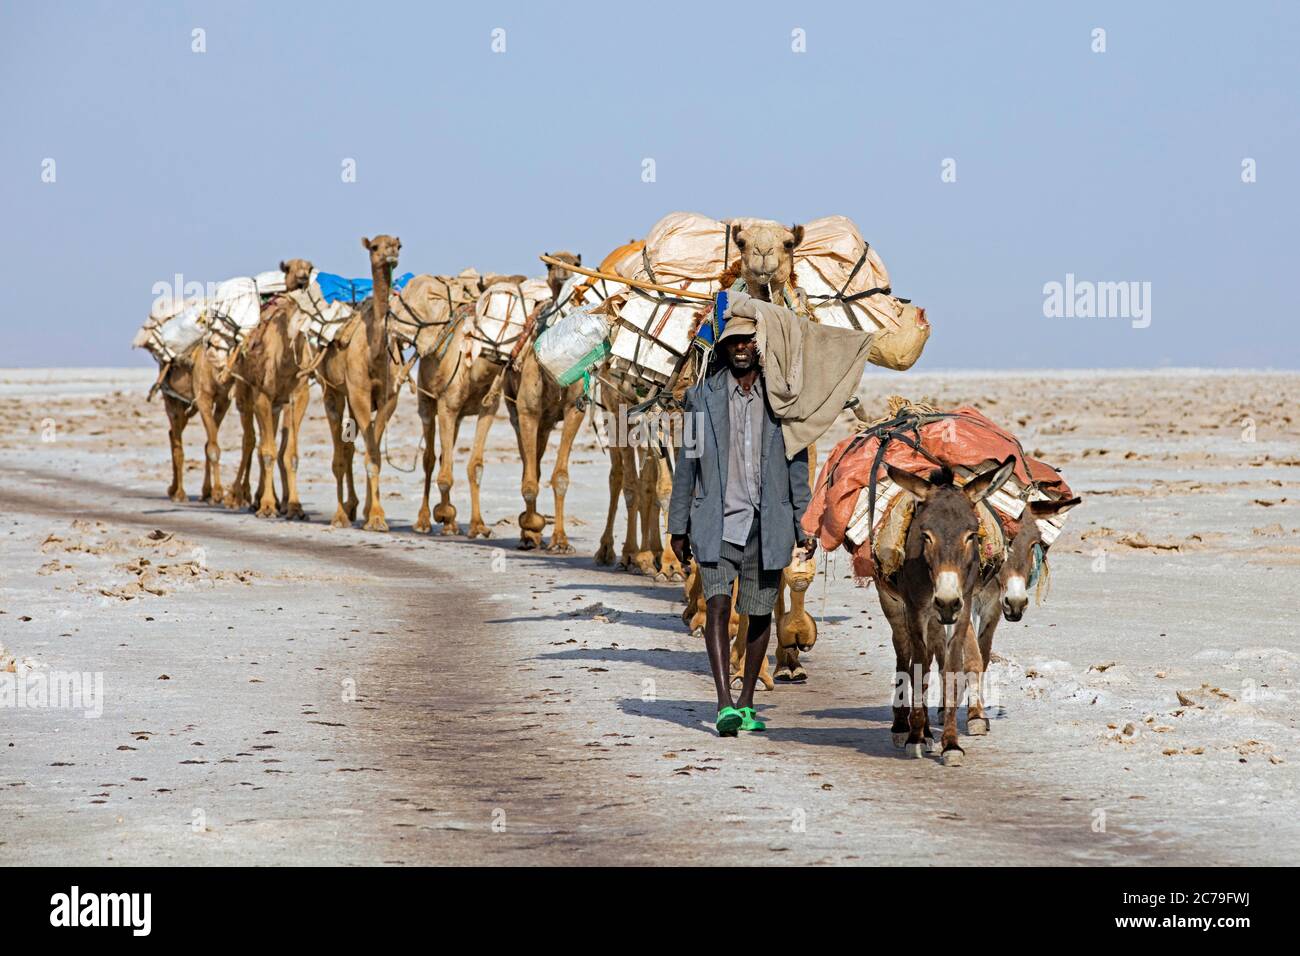 Cameleer of the Afar / Danakil tribe leading camel train / salt caravan with camels through Danakil Desert, hottest place on Earth, Ethiopia, Africa Stock Photo